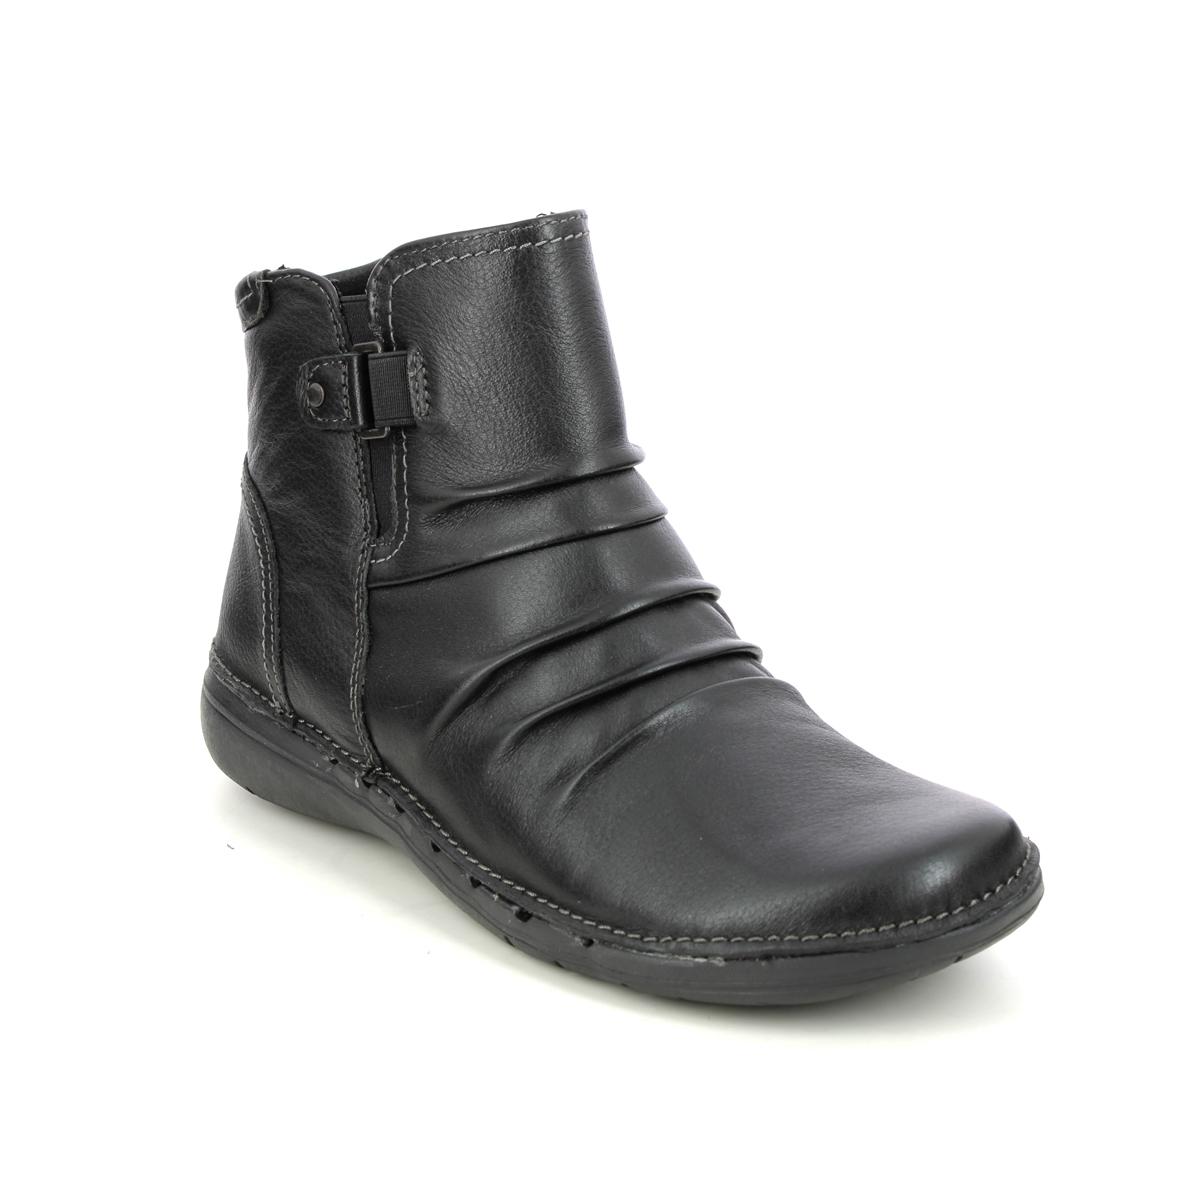 Clarks Un Loop Top Black leather Ankle Boots